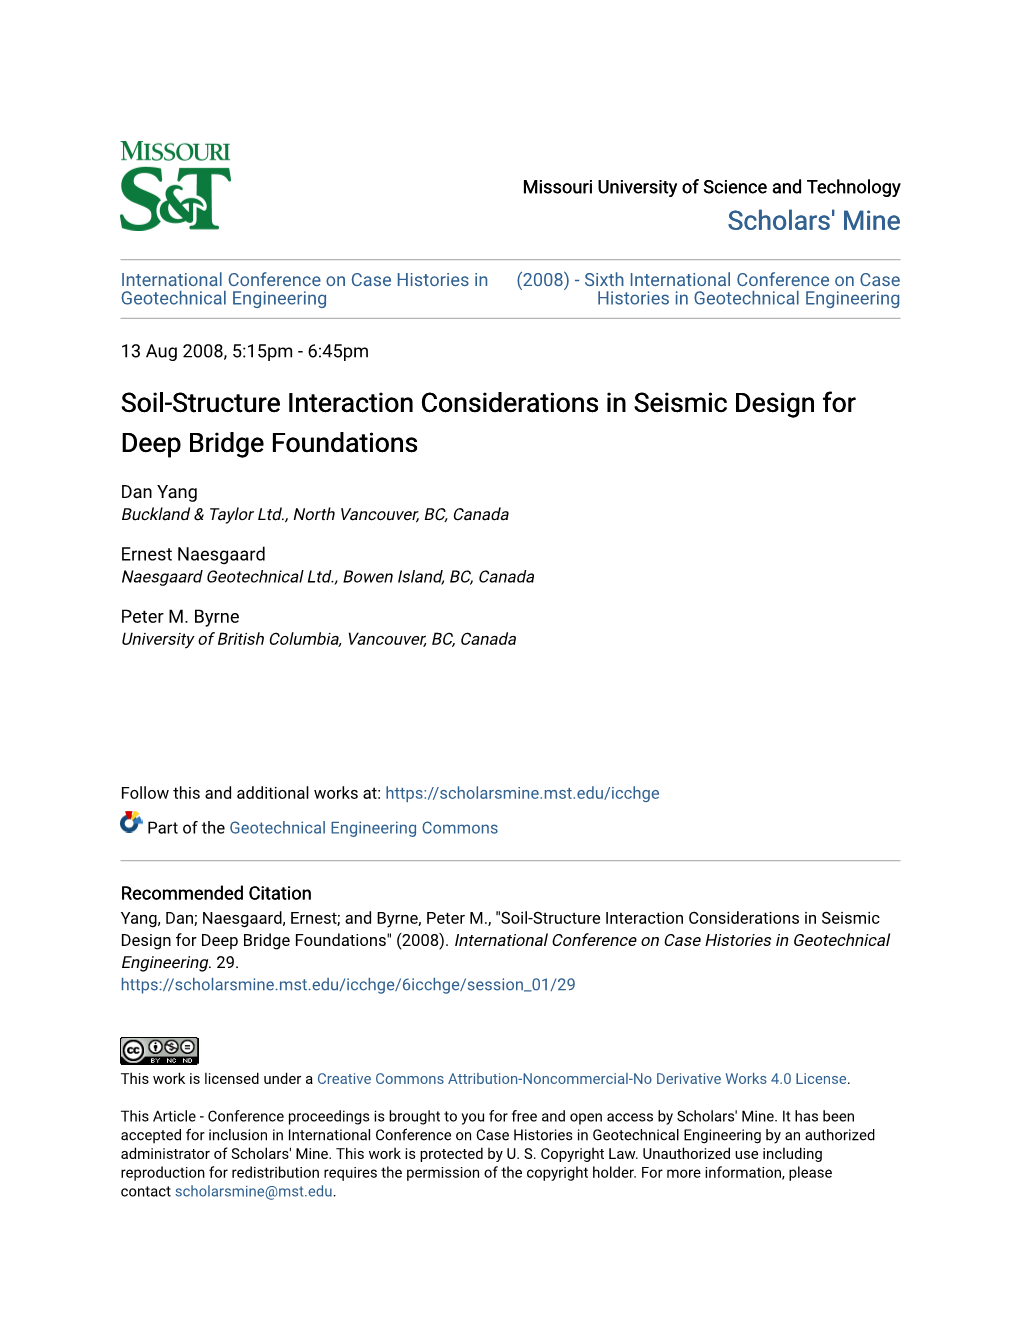 Soil-Structure Interaction Considerations in Seismic Design for Deep Bridge Foundations